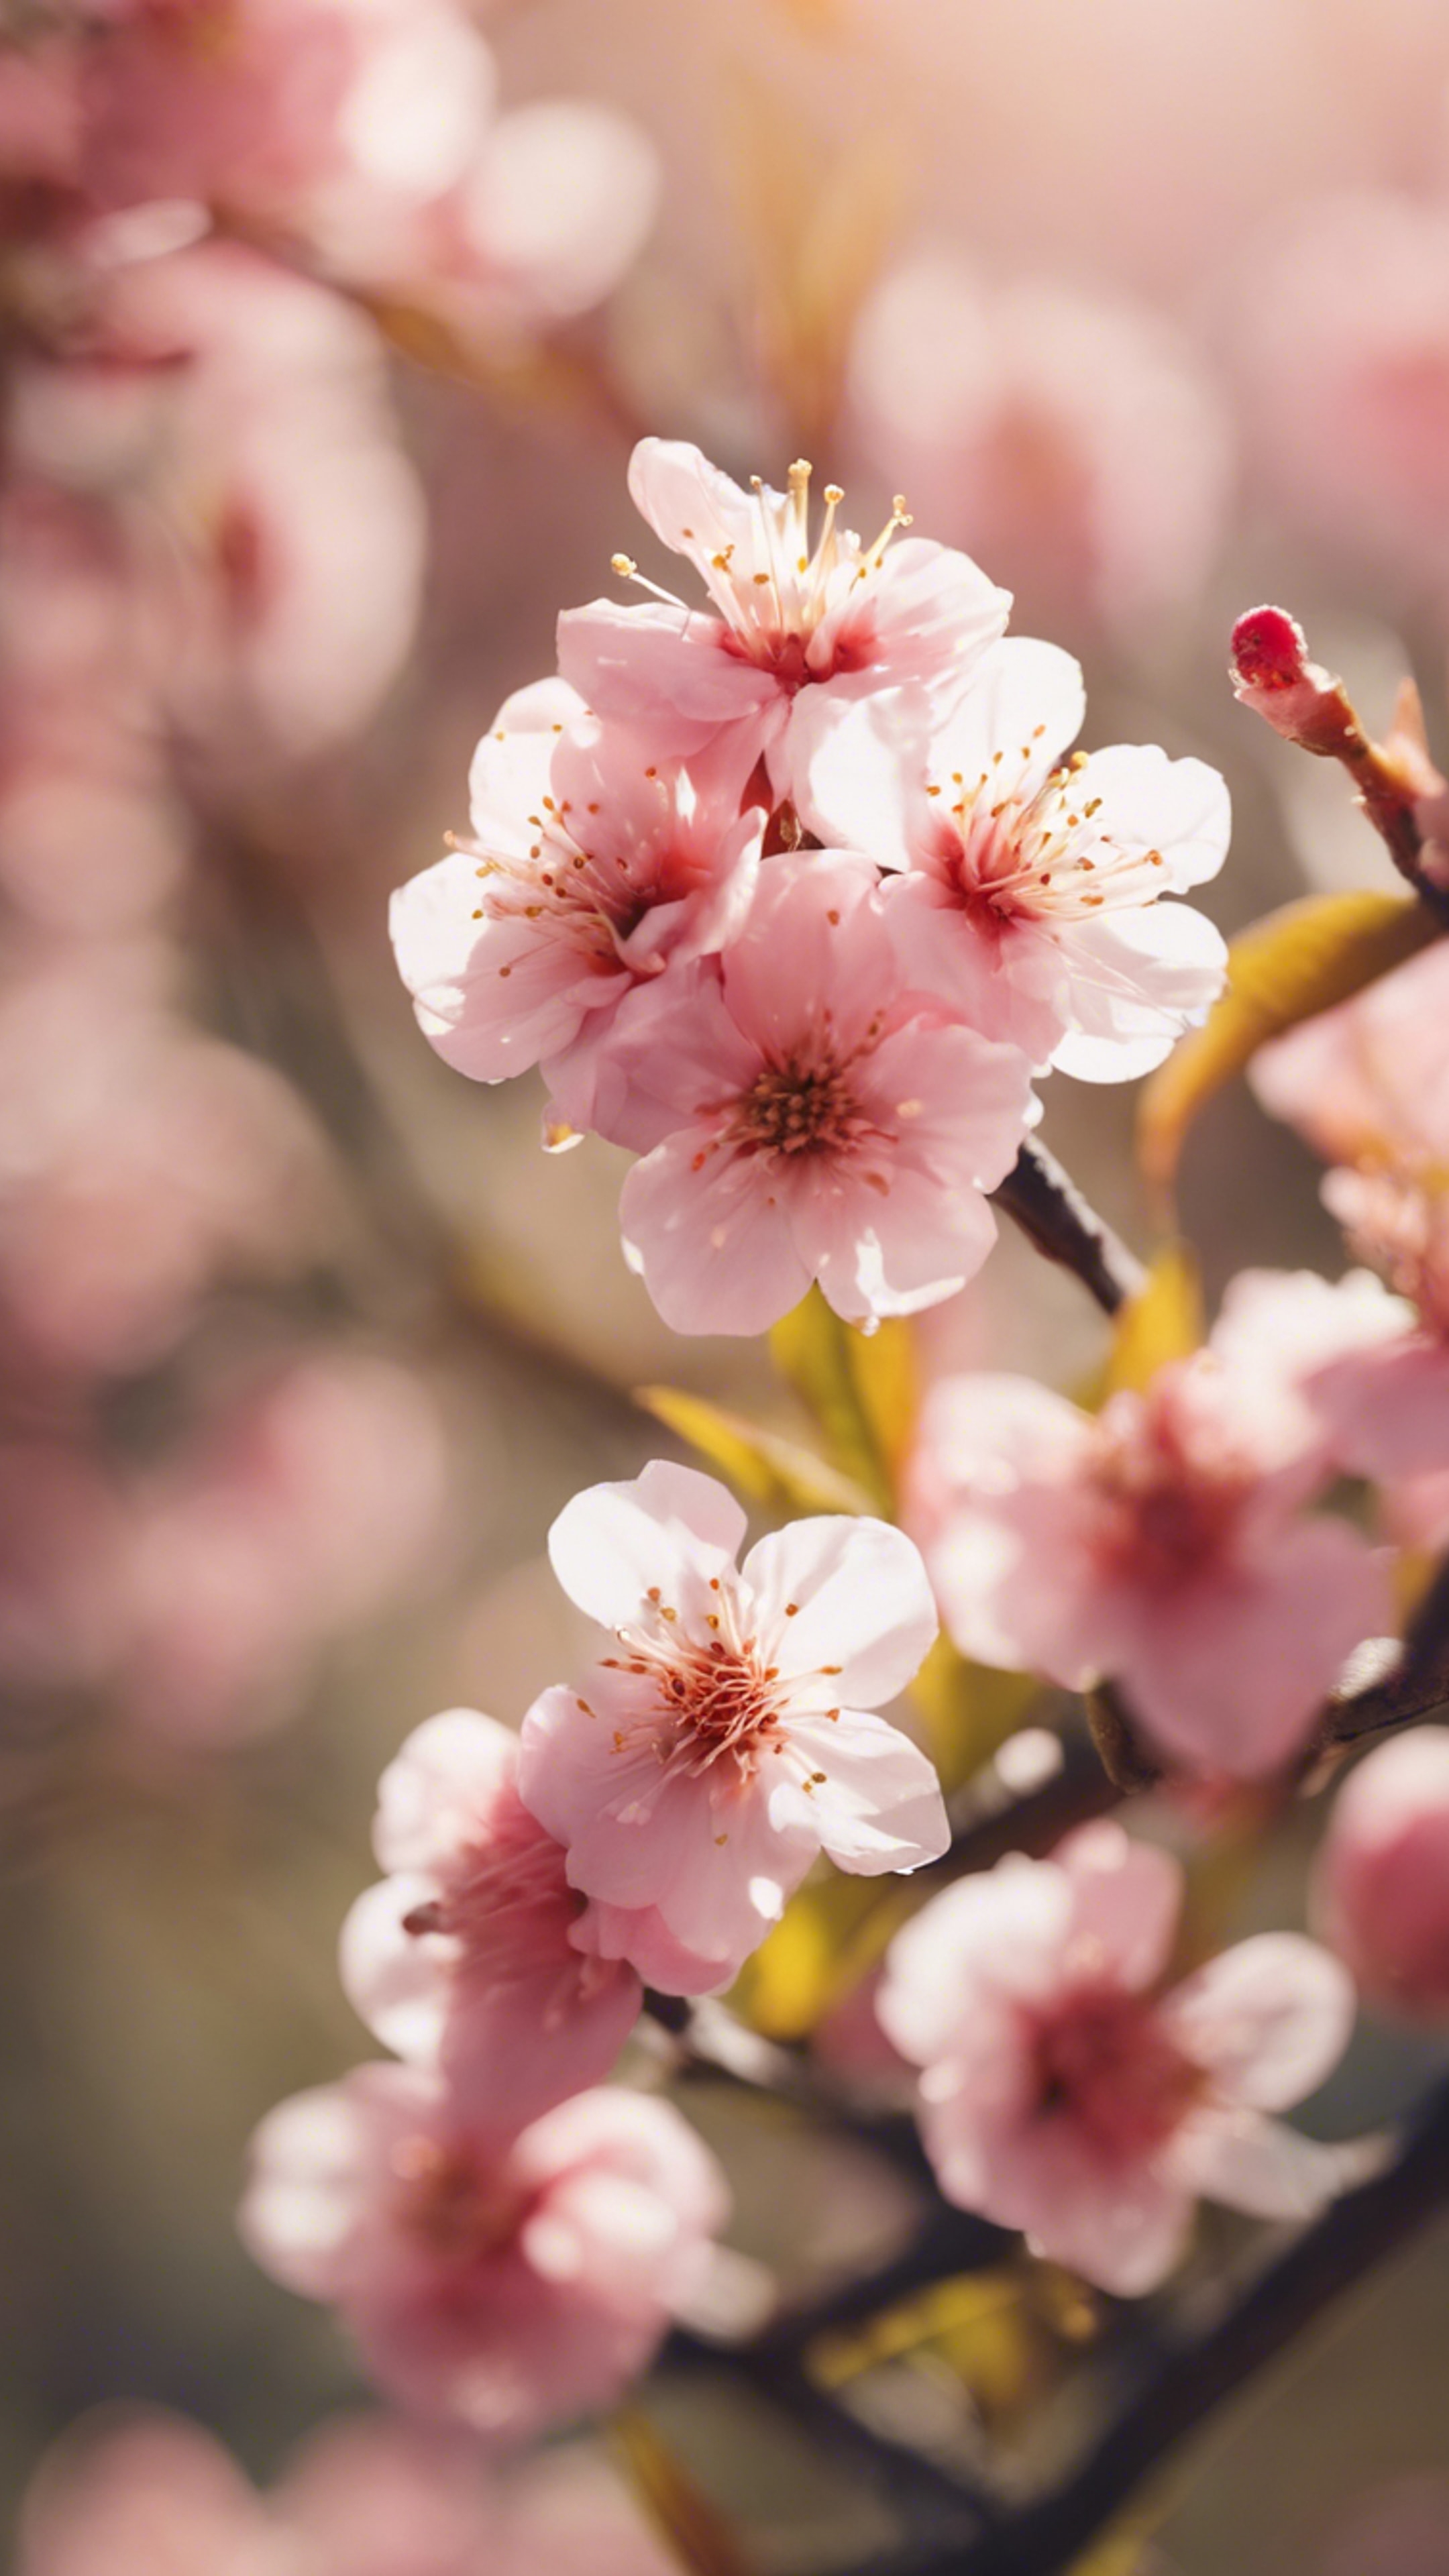 A close-up of happy peach flowers blooming cheerfully on a sunny spring day. Шпалери[9ab03d009b524efe8bfb]